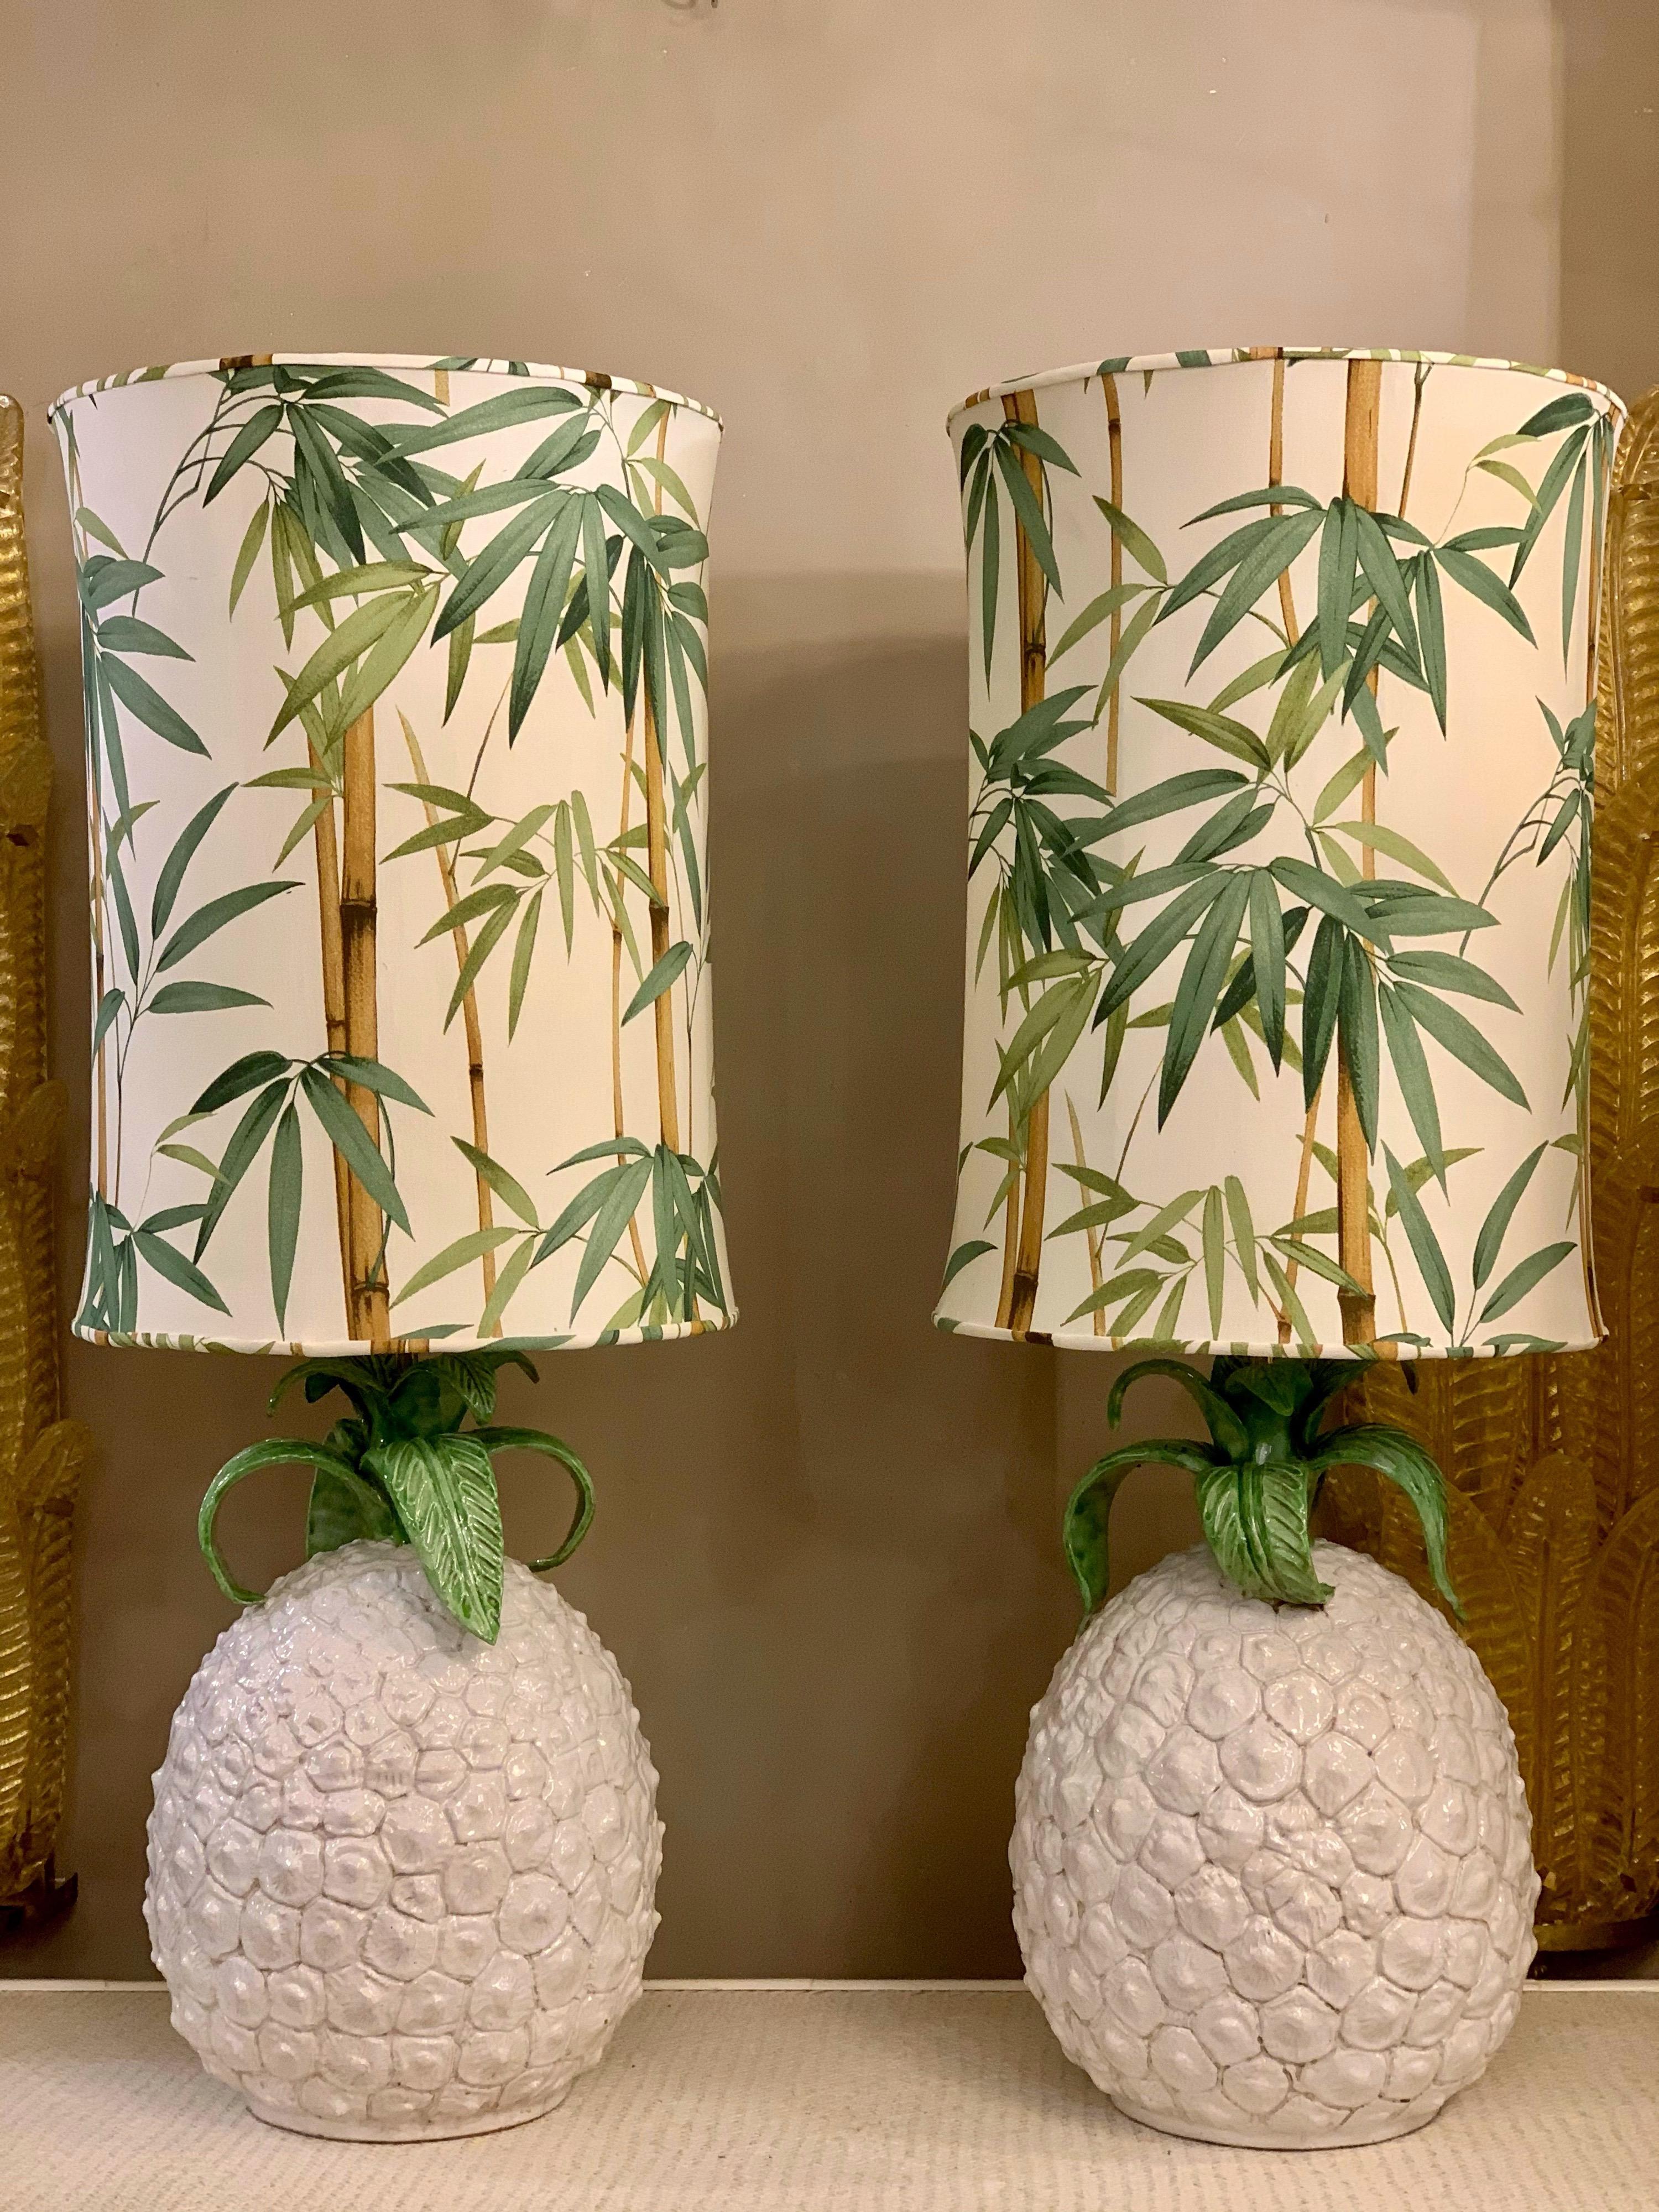 Pair of midcentury pineapple ceramic table lamps by Vivai del Sud with our handcrafted bamboo fabric lampshades. Perfect vintage condition
Two light bulbs each lamp.
Measurements of the pineapple ceramic lamp: diameter cm 32 x height 48;